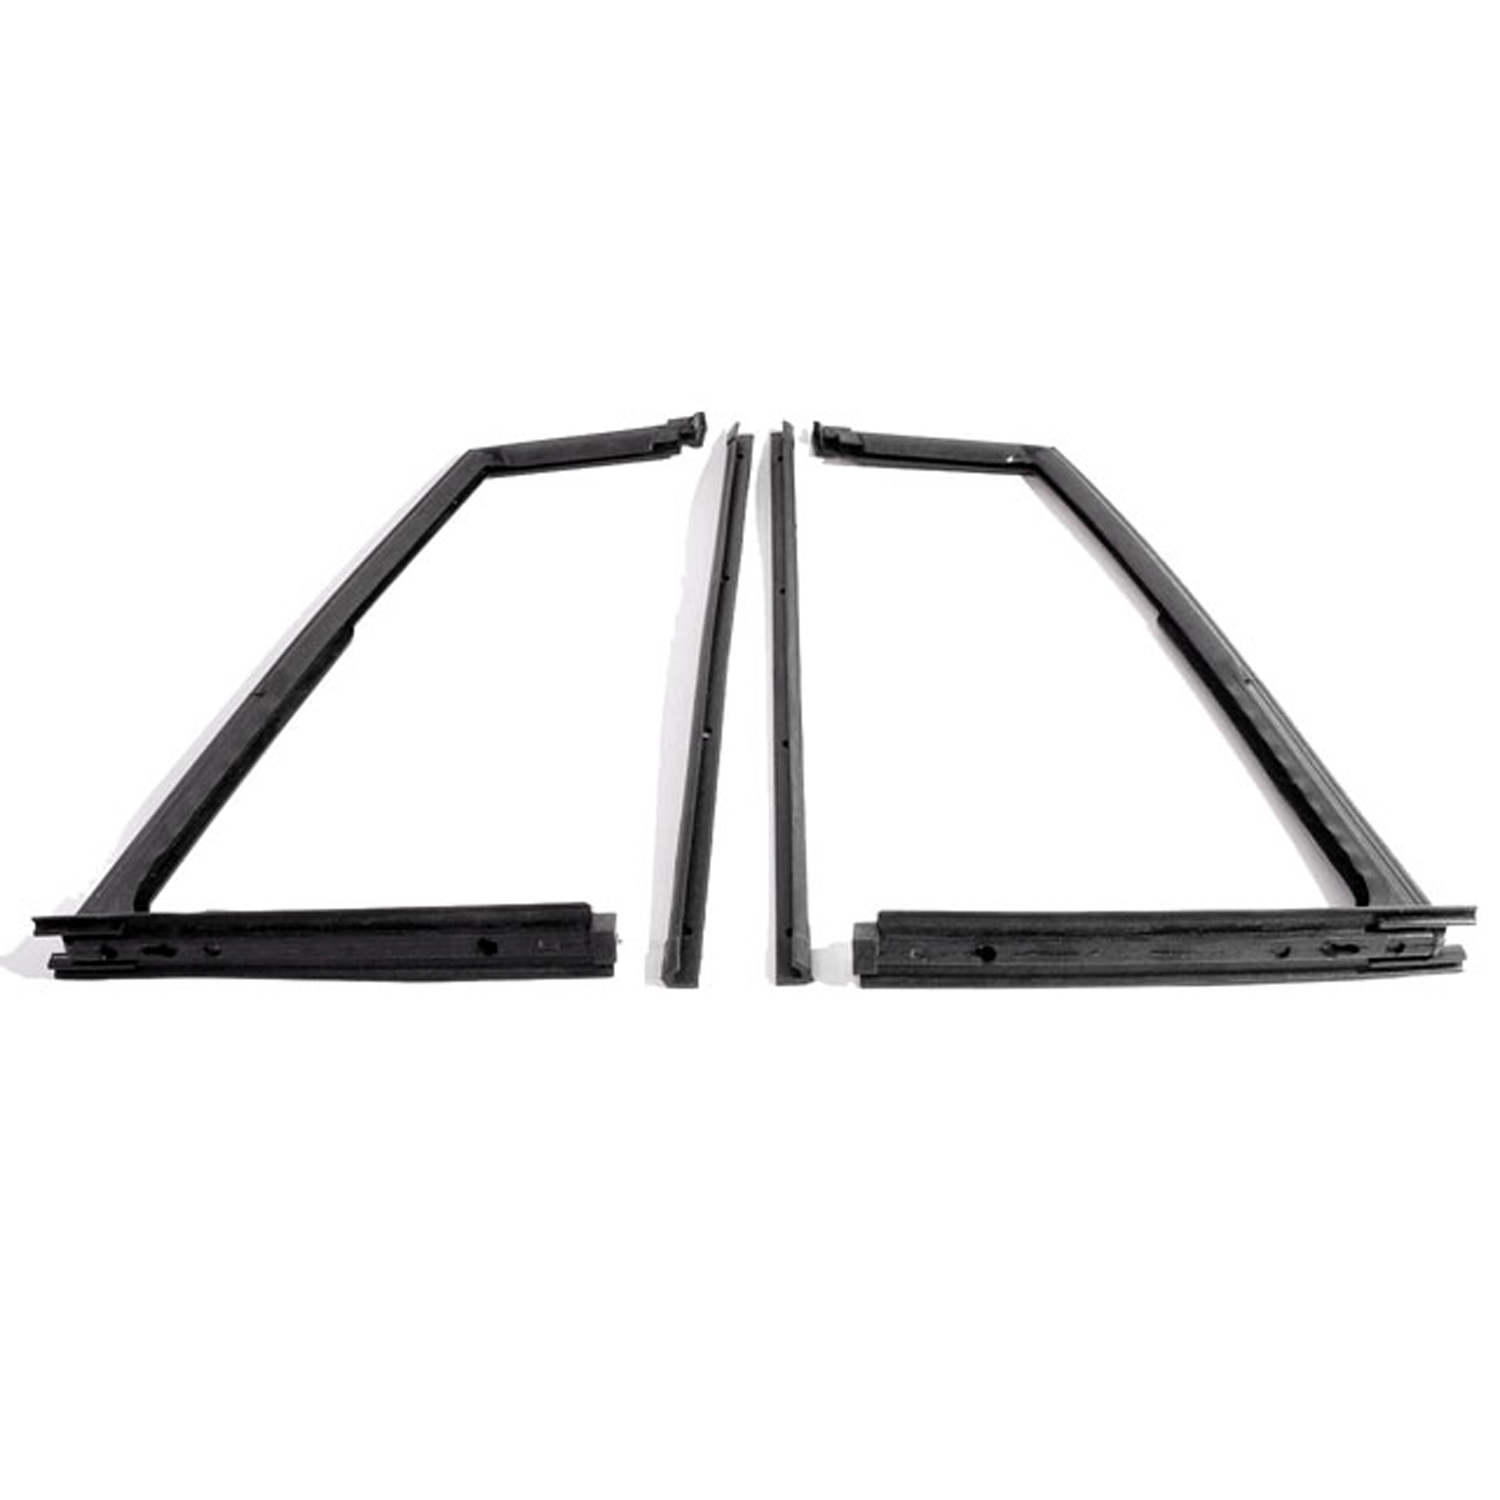 1973 Jeep JEEPSTER Vent Window Seals.  Pair-WR 9700